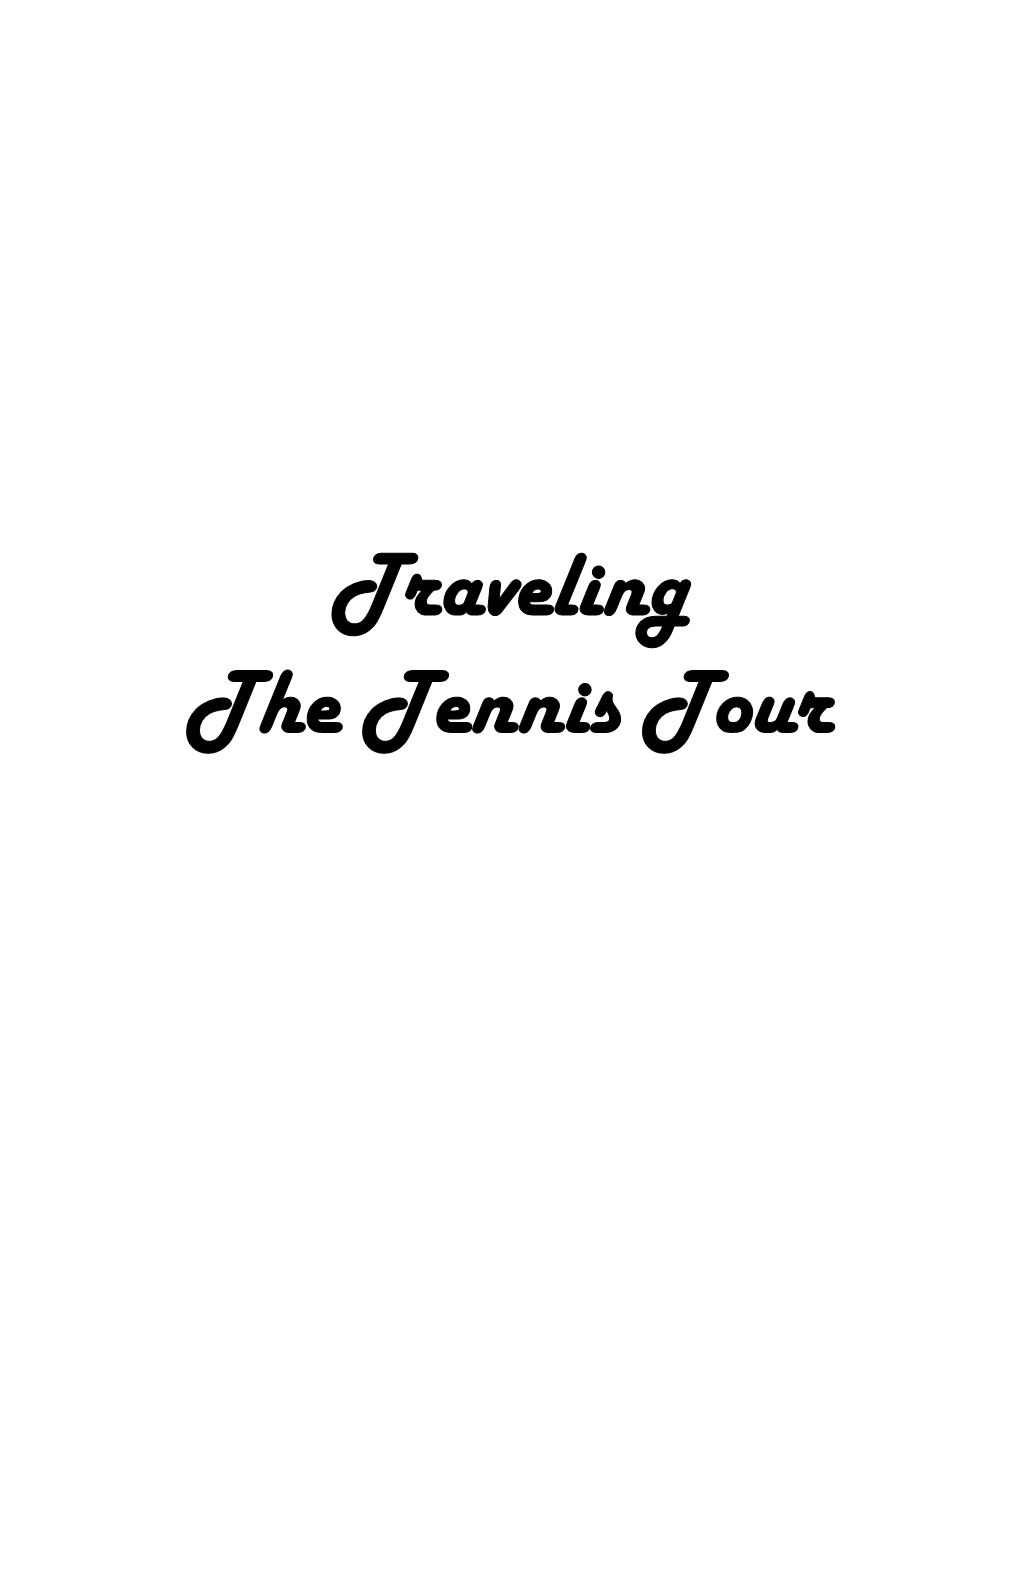 Traveling the Tennis Tour